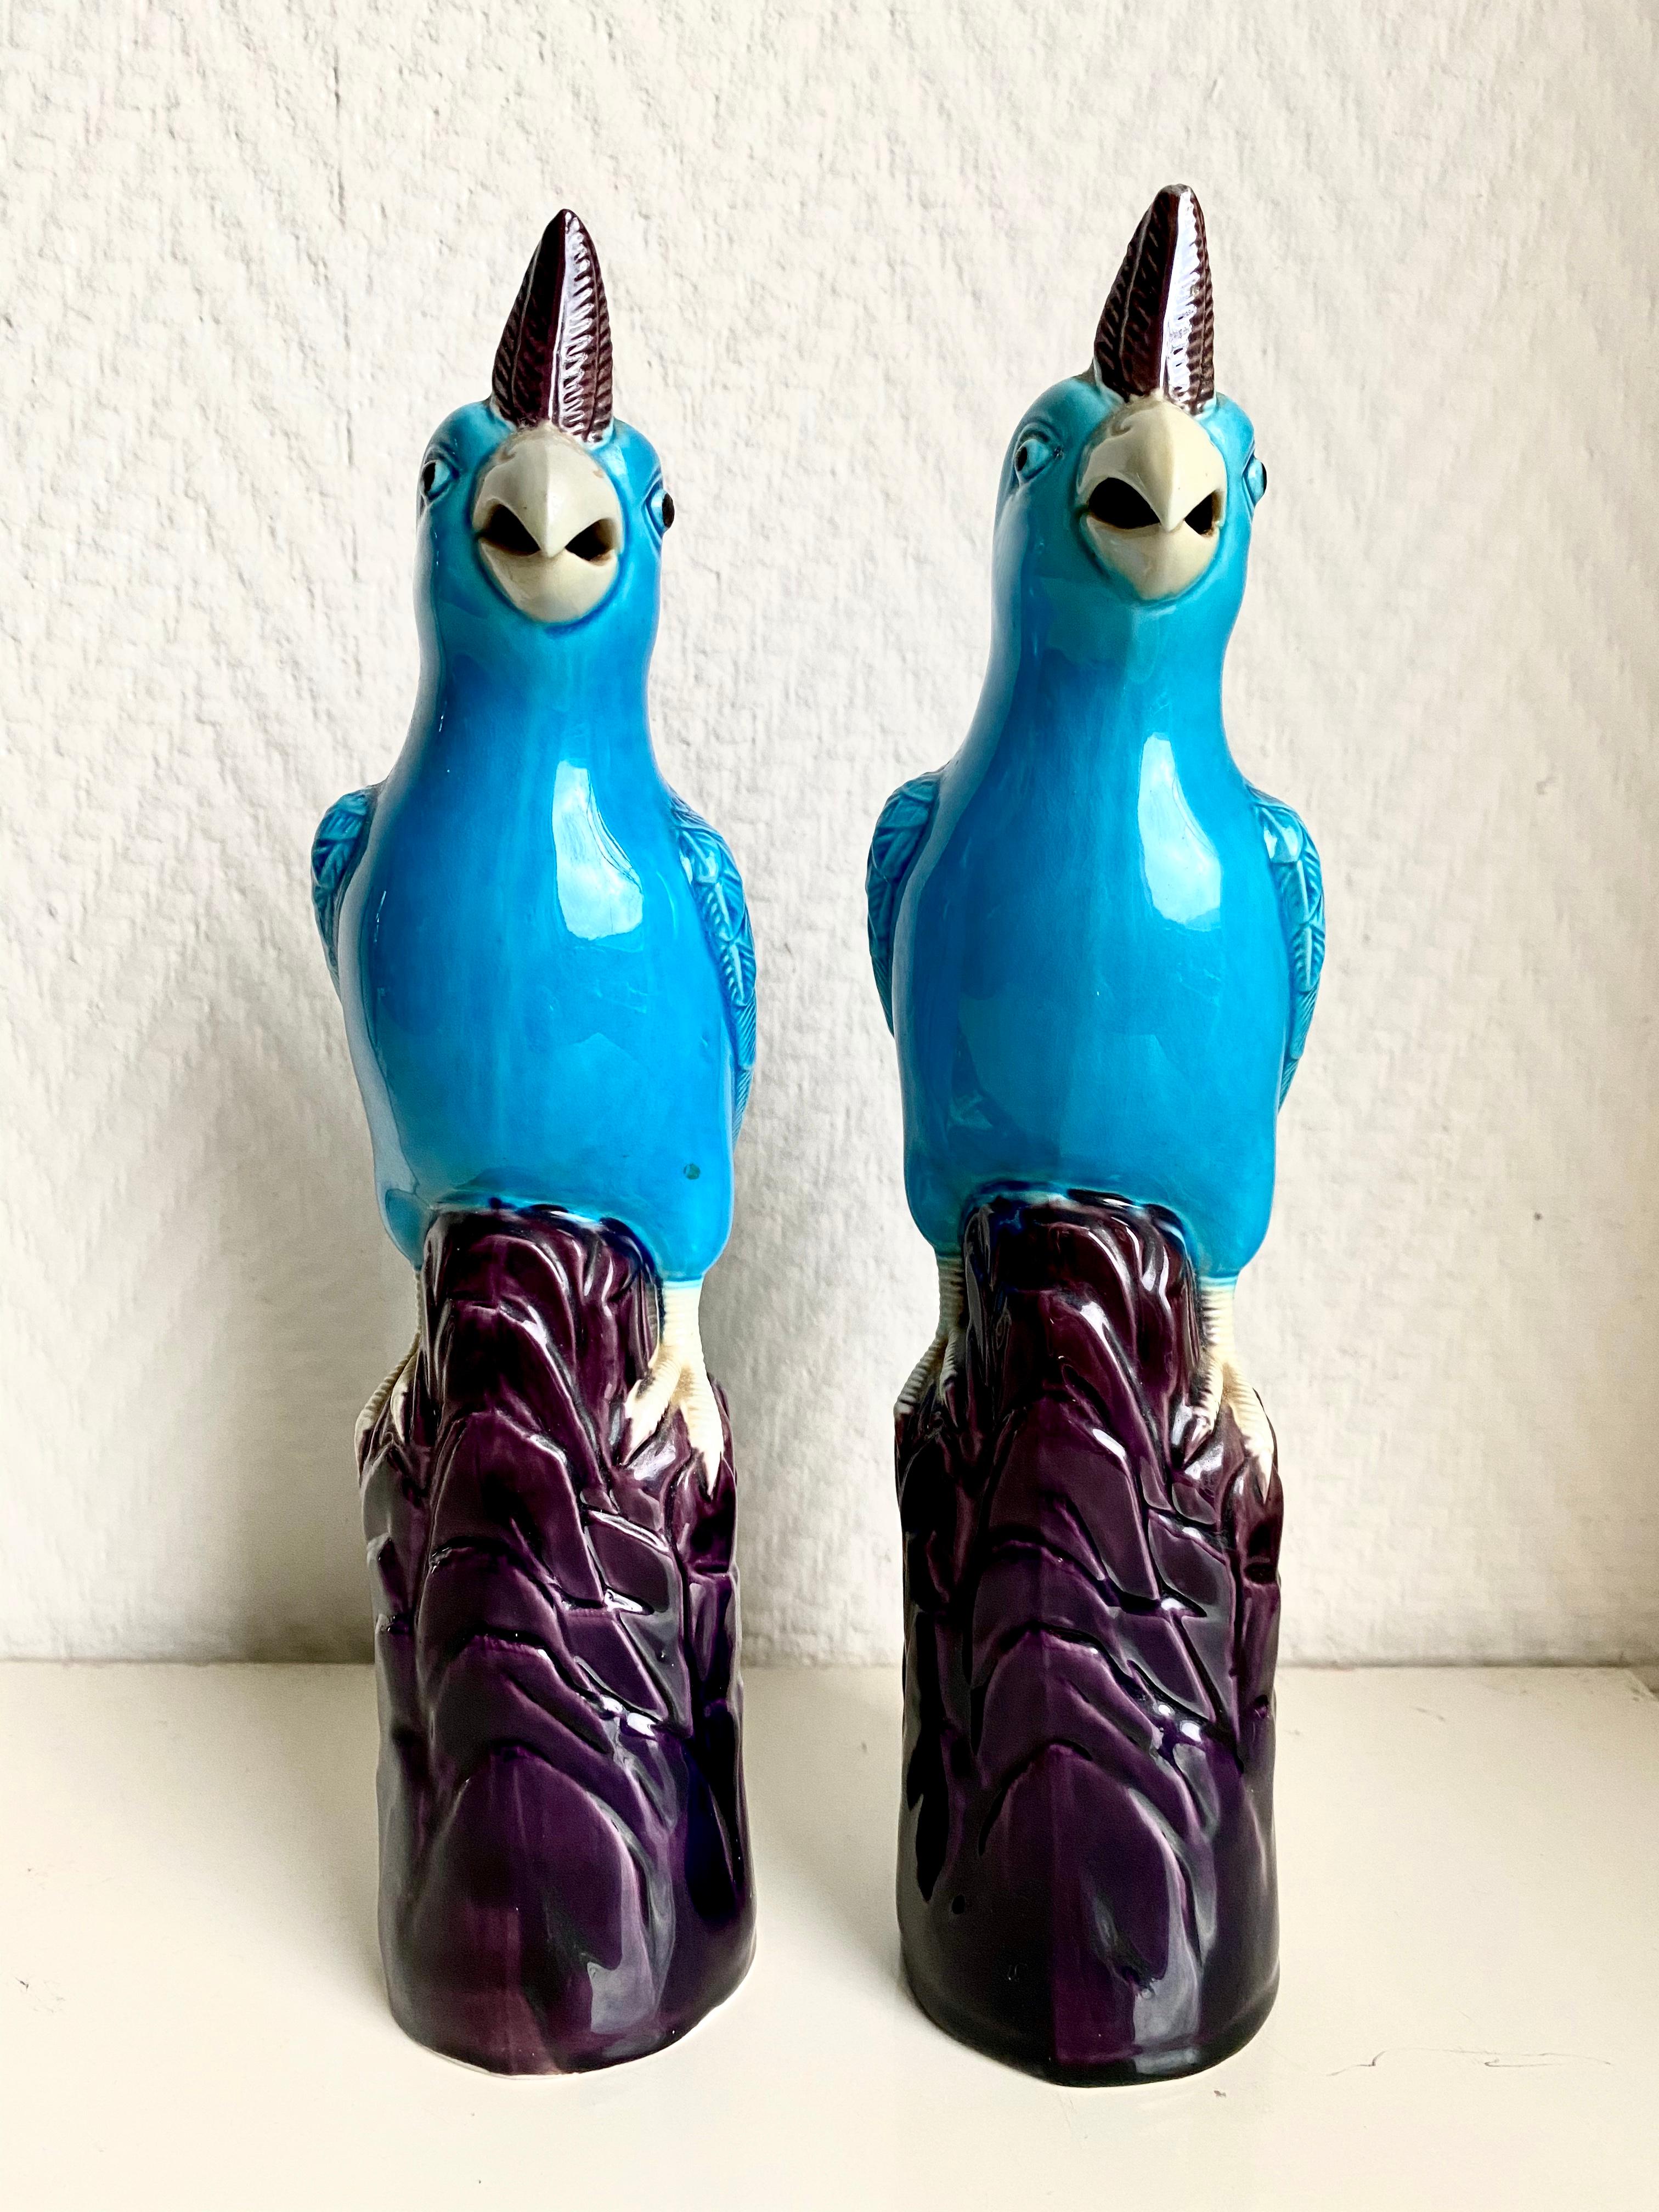 Wonderful pair of rare Chinese cockatoos which are resting on a deep purple log, feature beautiful Turquoise feathers and even small tongues. The two birds remain in very good condition with only minor wear. No chips or flee bites. 